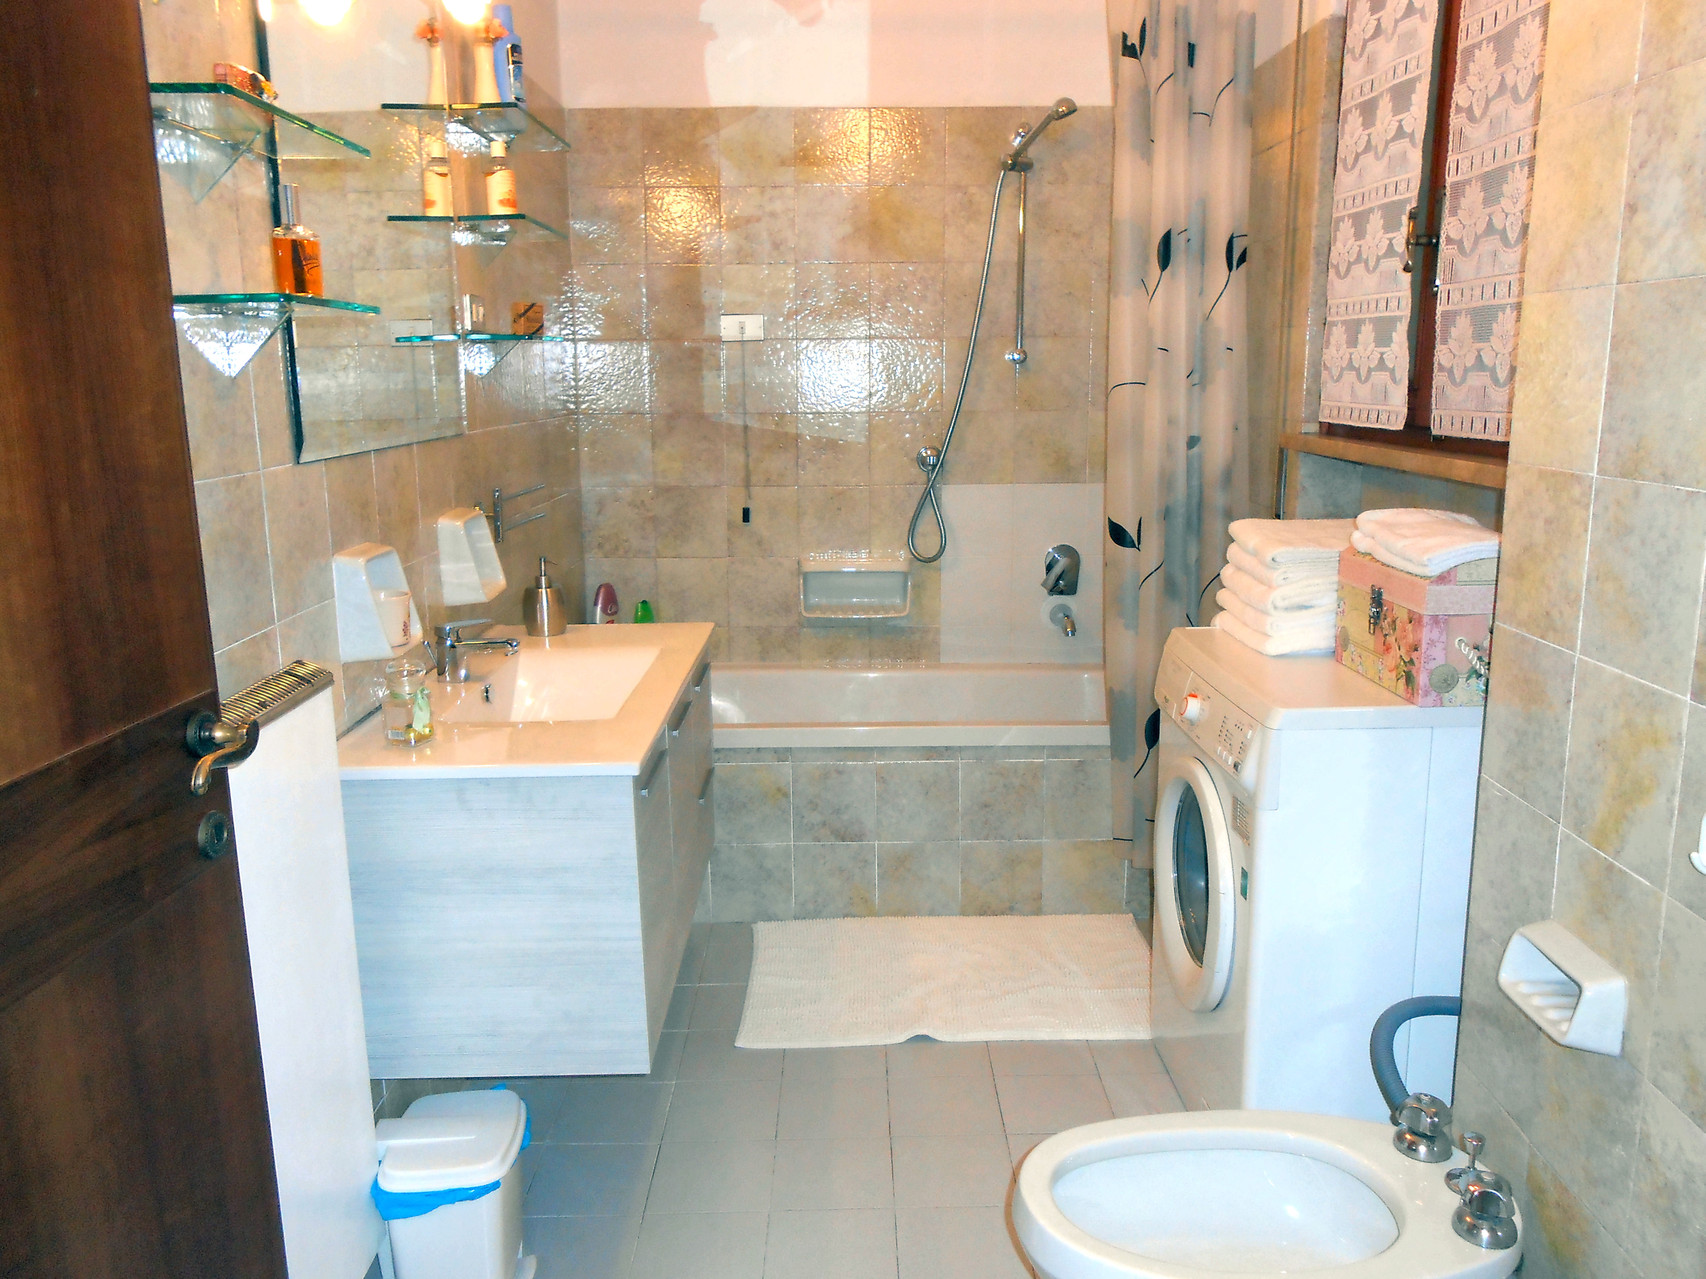 The 3 bathrooms are equipped with everything you need (soap, shampoo, towels, hair dryer, ..) as the bathroom of your home. 